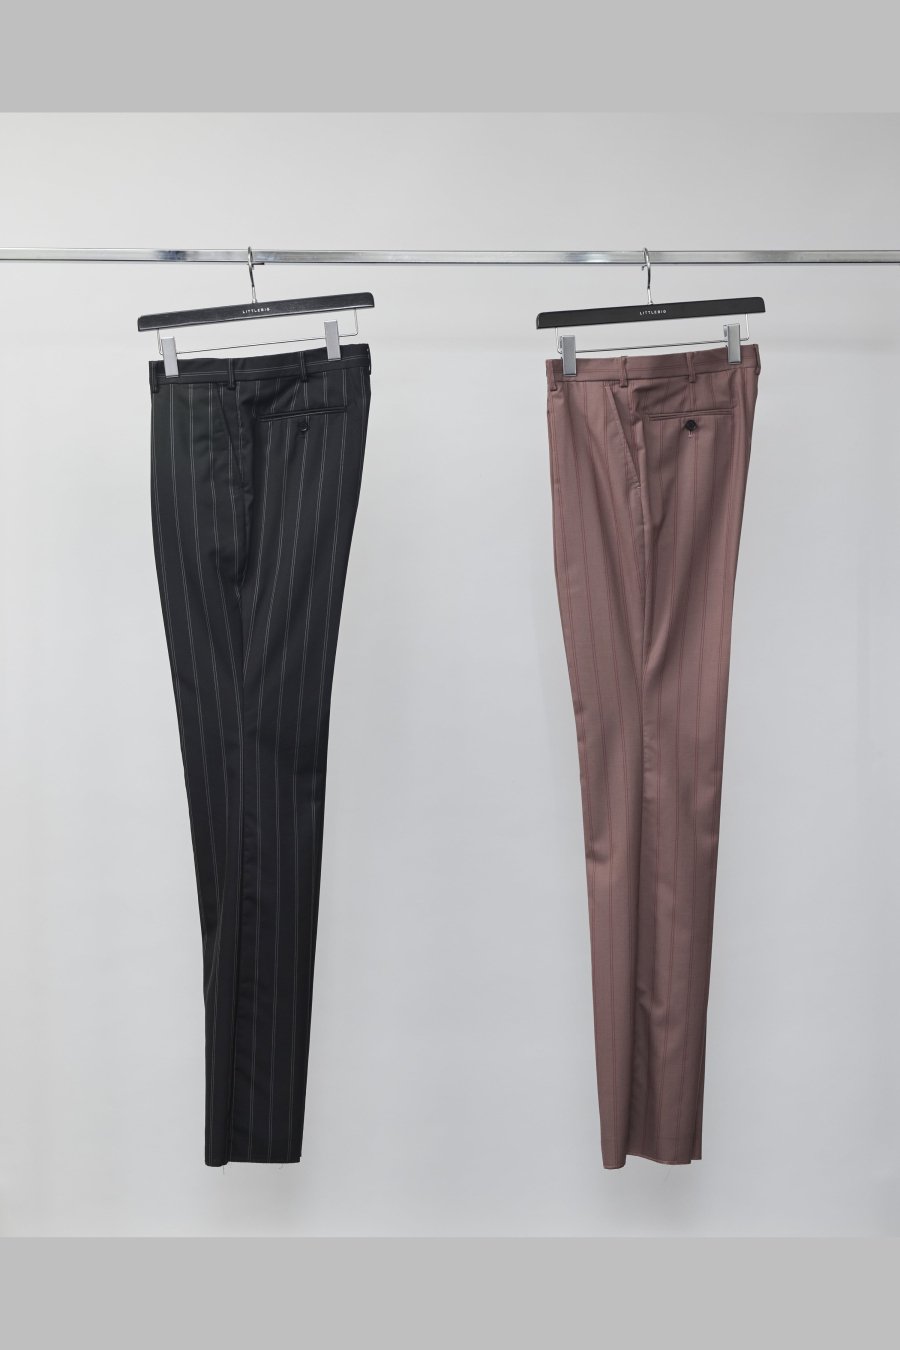 LITTLEBIG（リトルビッグ）の22ss Tucked Flare Trousers Black or